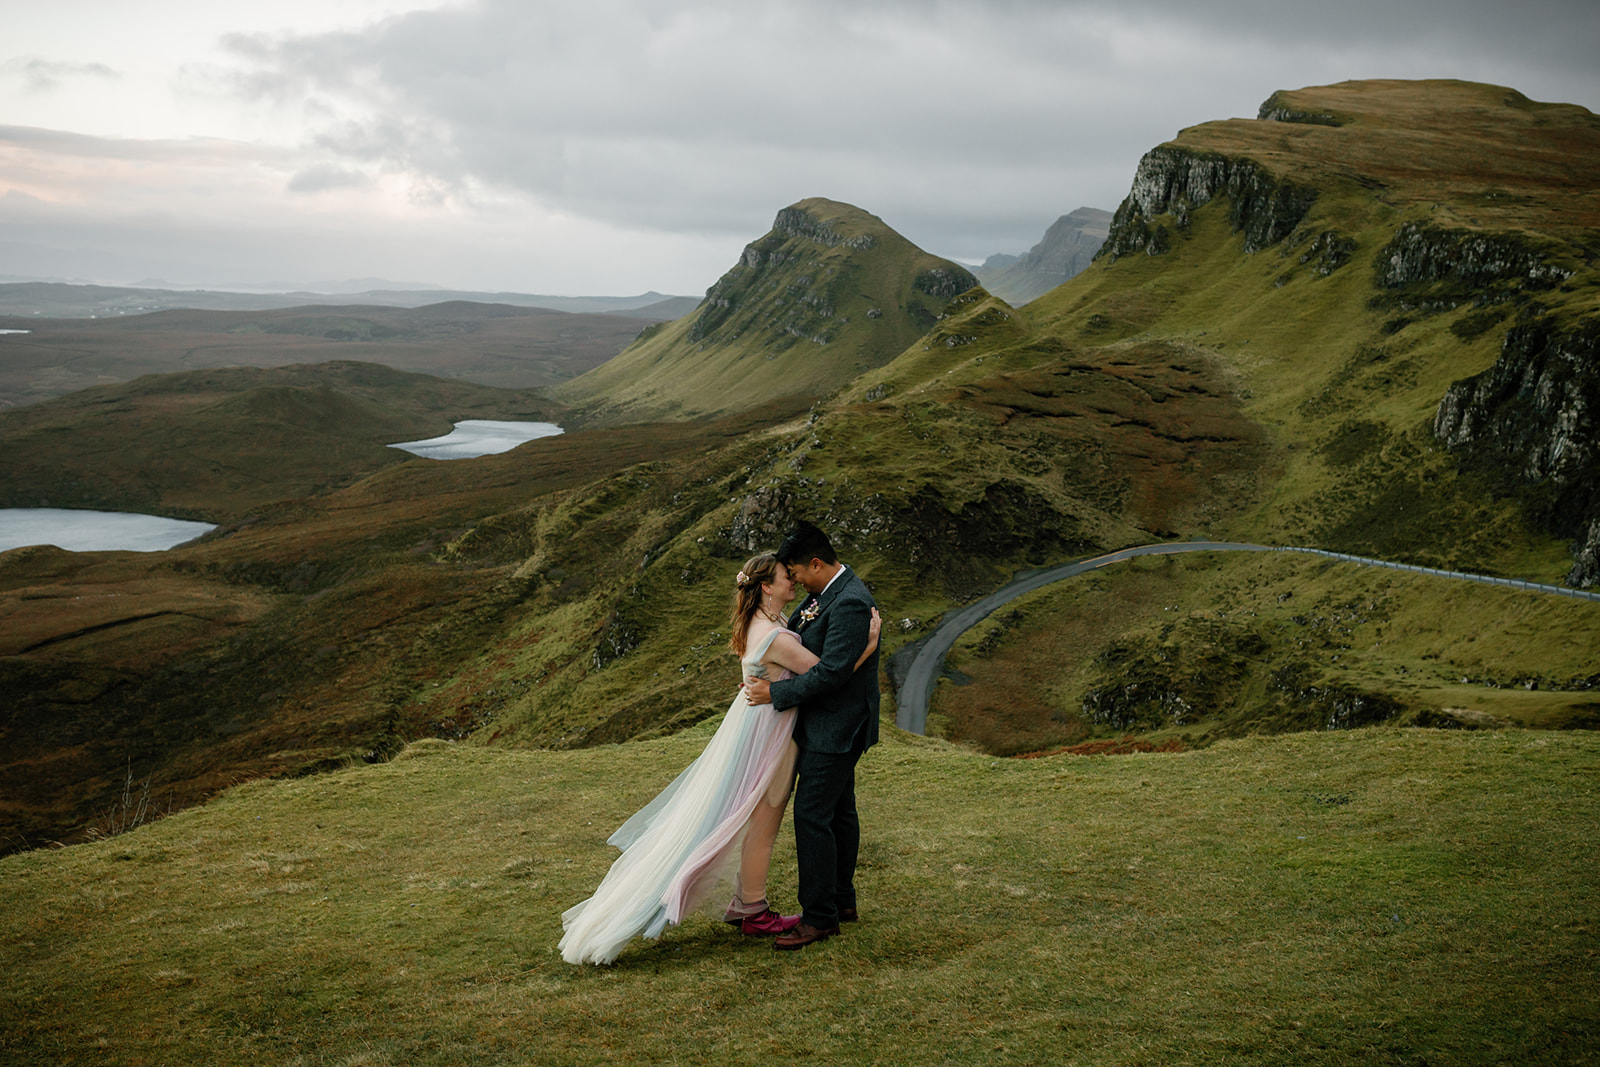 Mellie and Andrew shared a loving hug with the majestic view of Quiraing, Isle of Skye as their backdrop